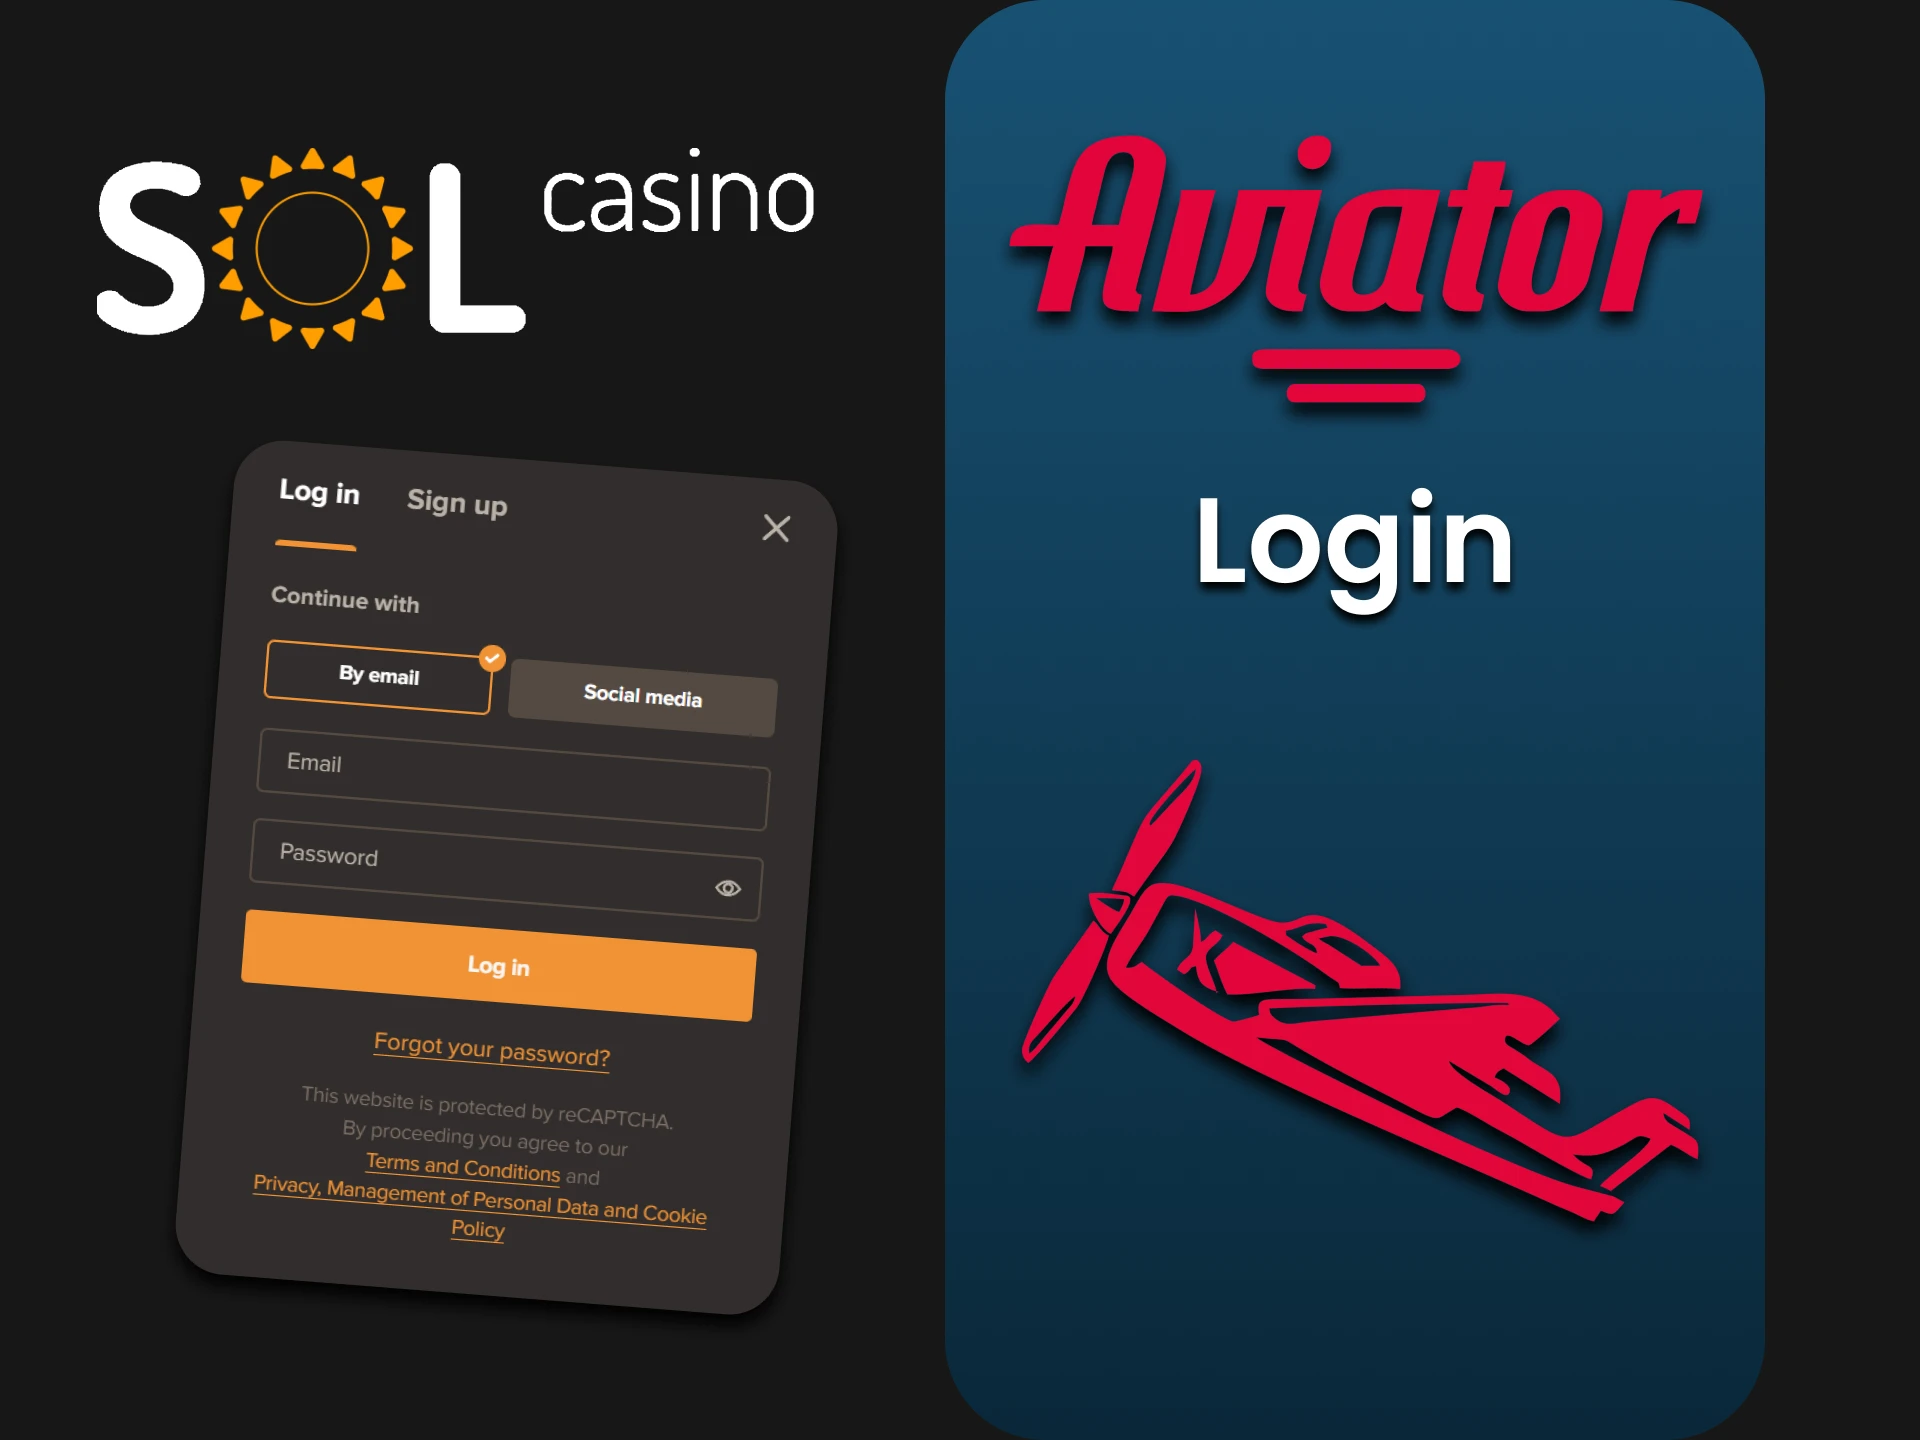 Log in to your personal account at Sol Casino to play Aviator.